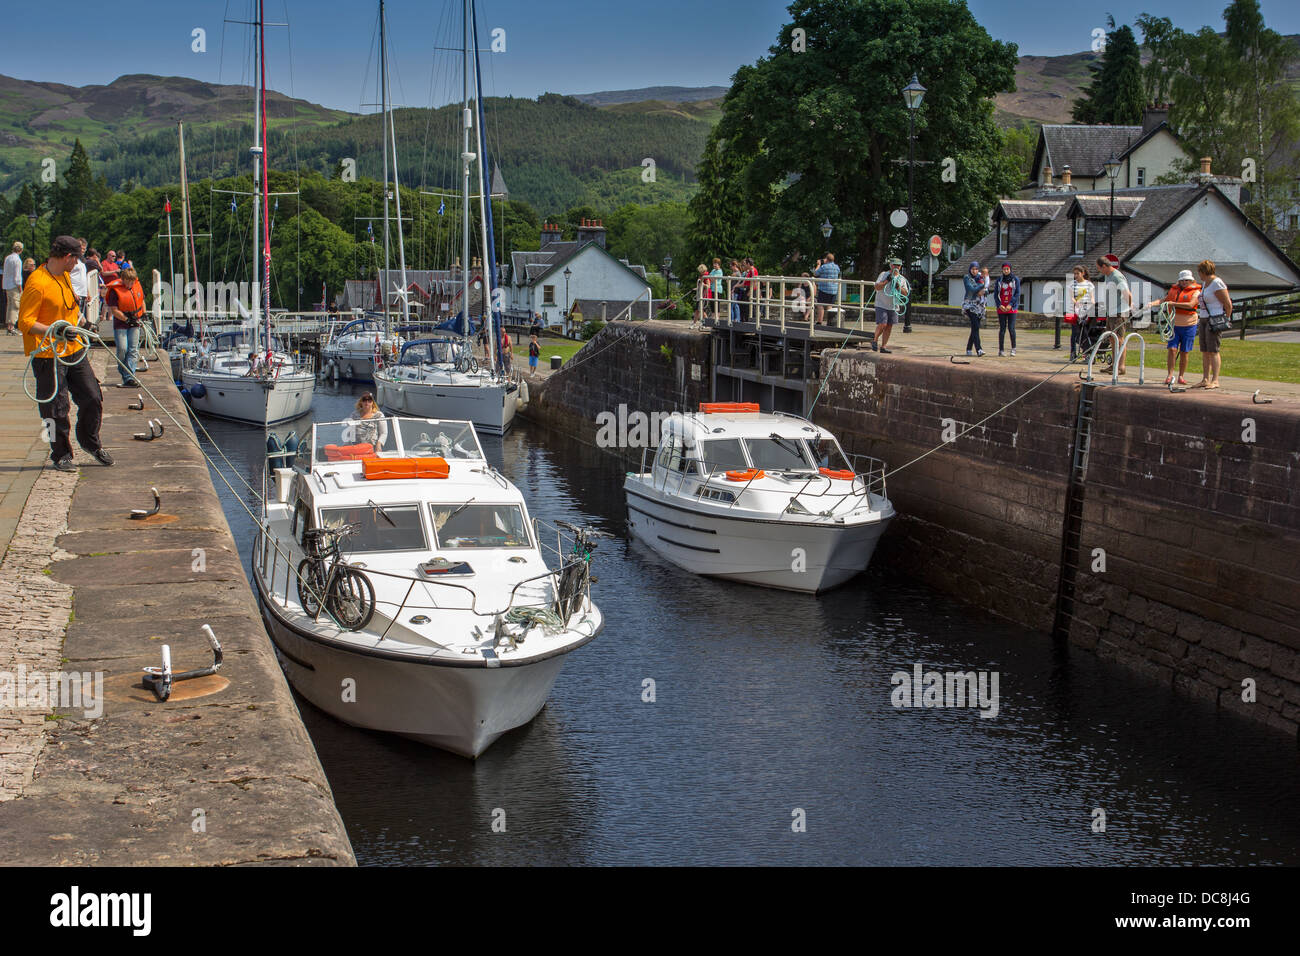 PULLING BOATS THROUGH THE LOCKS ON THE CALEDONIAN CANAL AT FORT AUGUSTUS LOCH NESS SCOTLAND Stock Photo